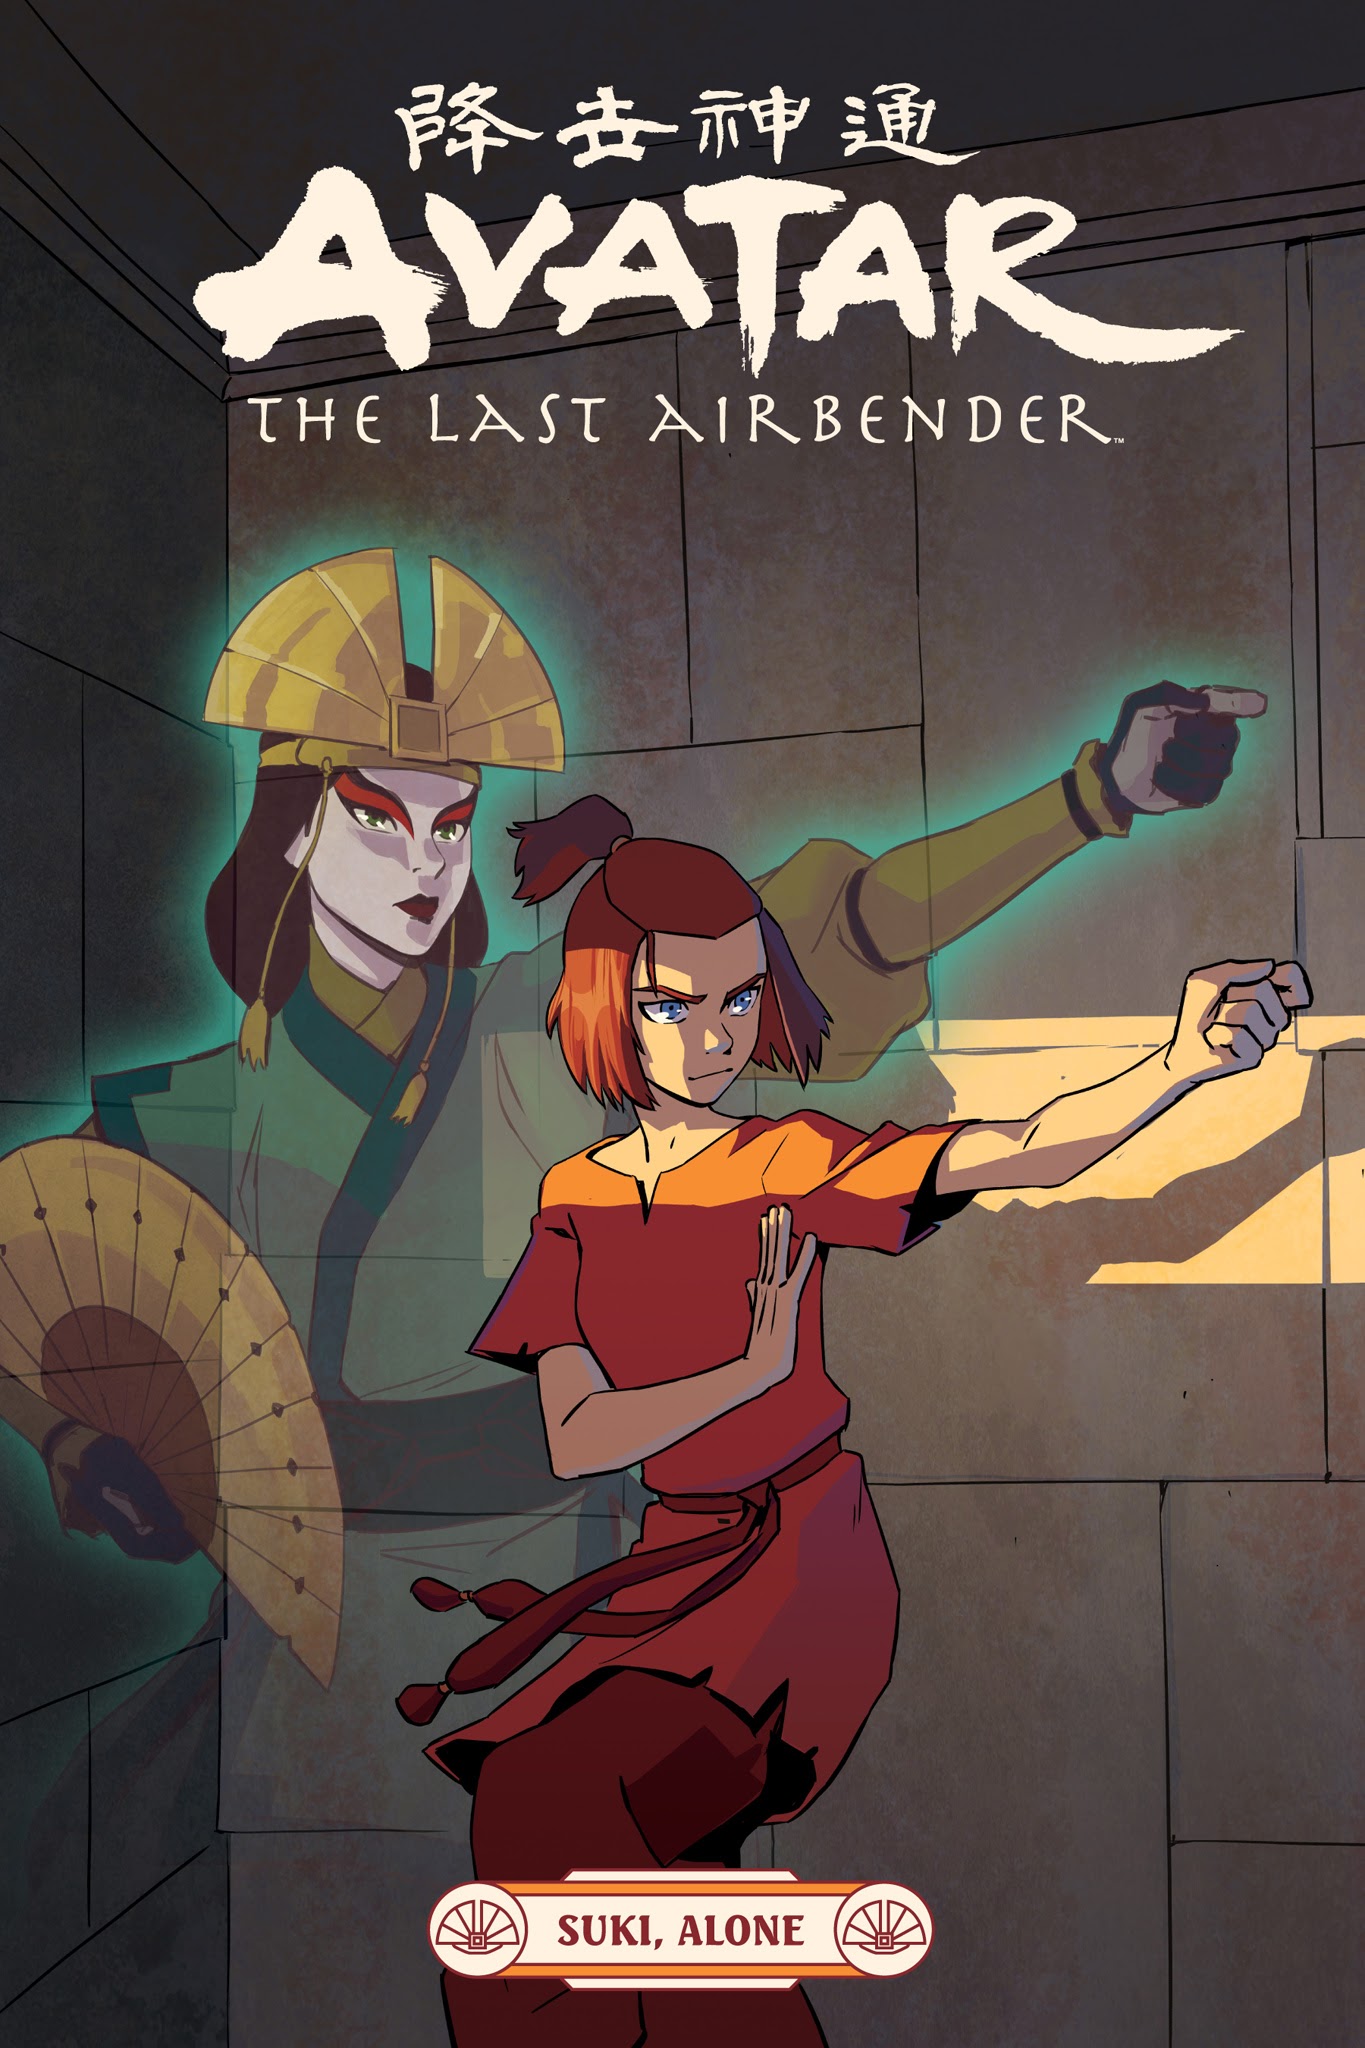 Avatar The Last Airbender Suki Alone Tpb | Read Avatar The Last Airbender  Suki Alone Tpb comic online in high quality. Read Full Comic online for  free - Read comics online in